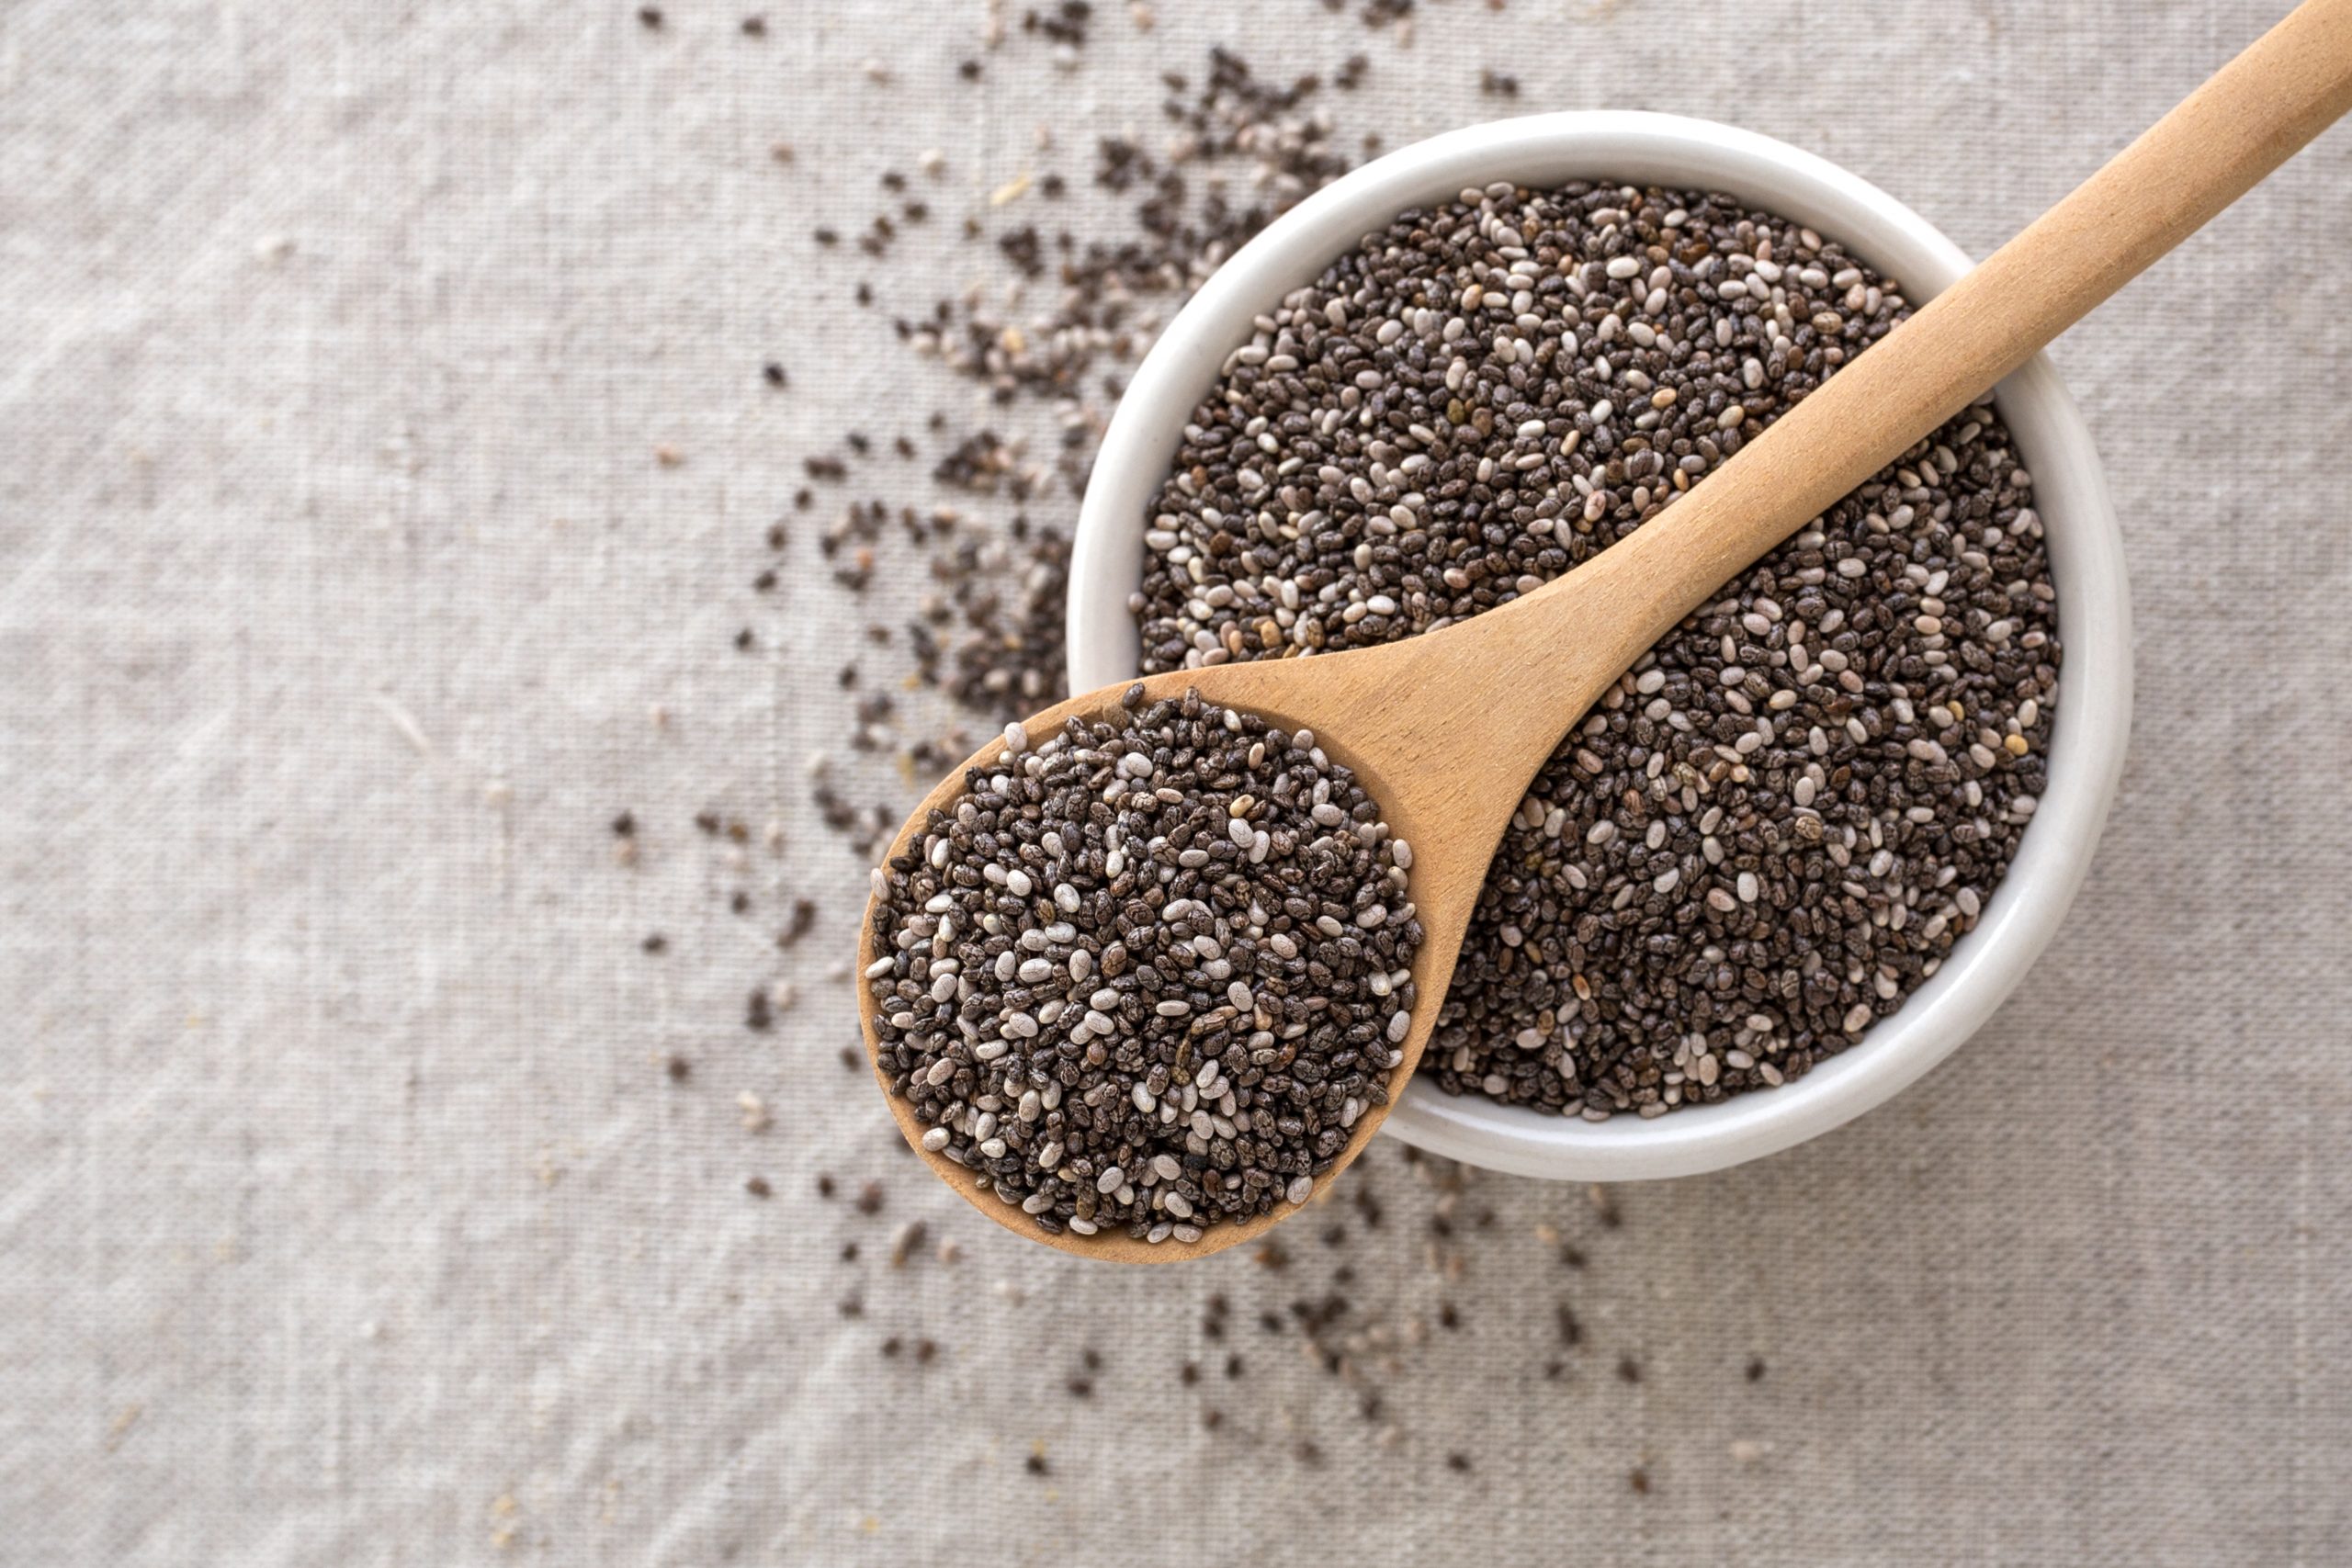 Chia,Seeds,In,Wooden,Spoon,And,Bowl,From,Top,View